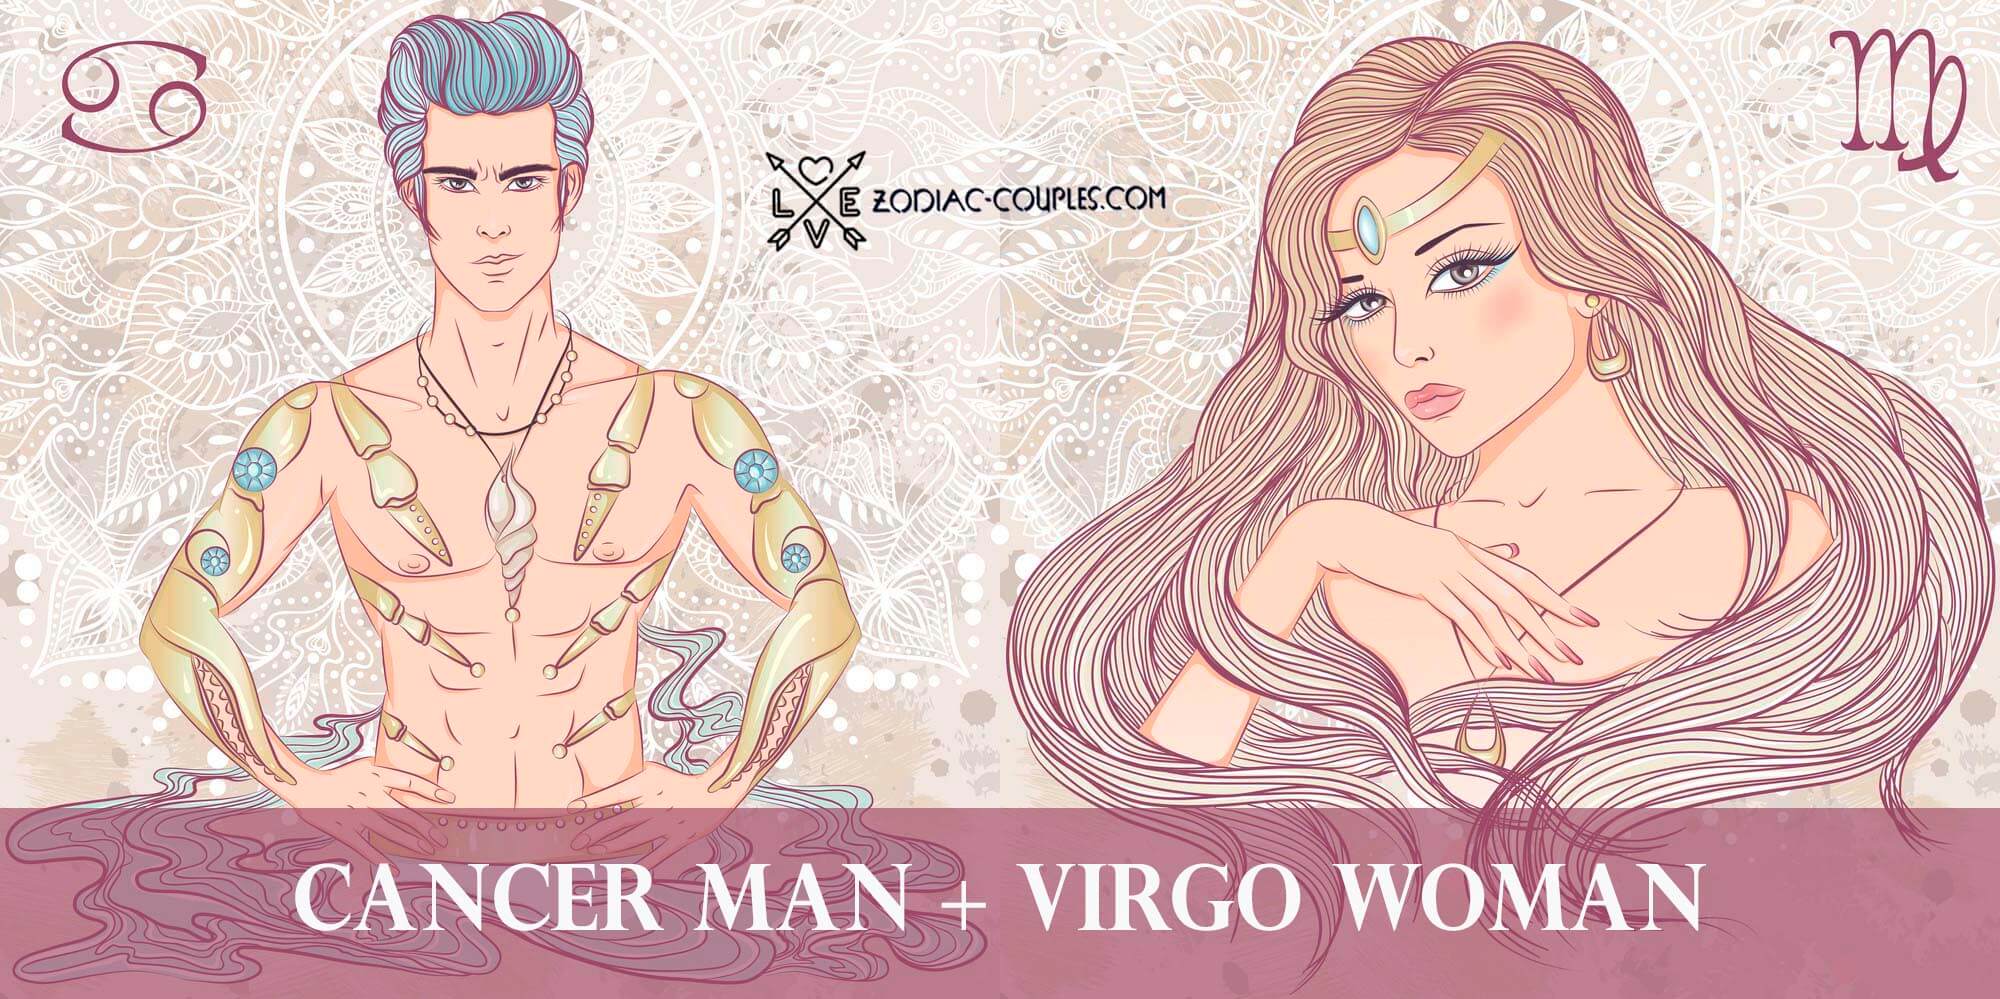 Cancer man and Virgo woman: Celebrity Couples and Compatibility ♋♍- Zodiac Couples...